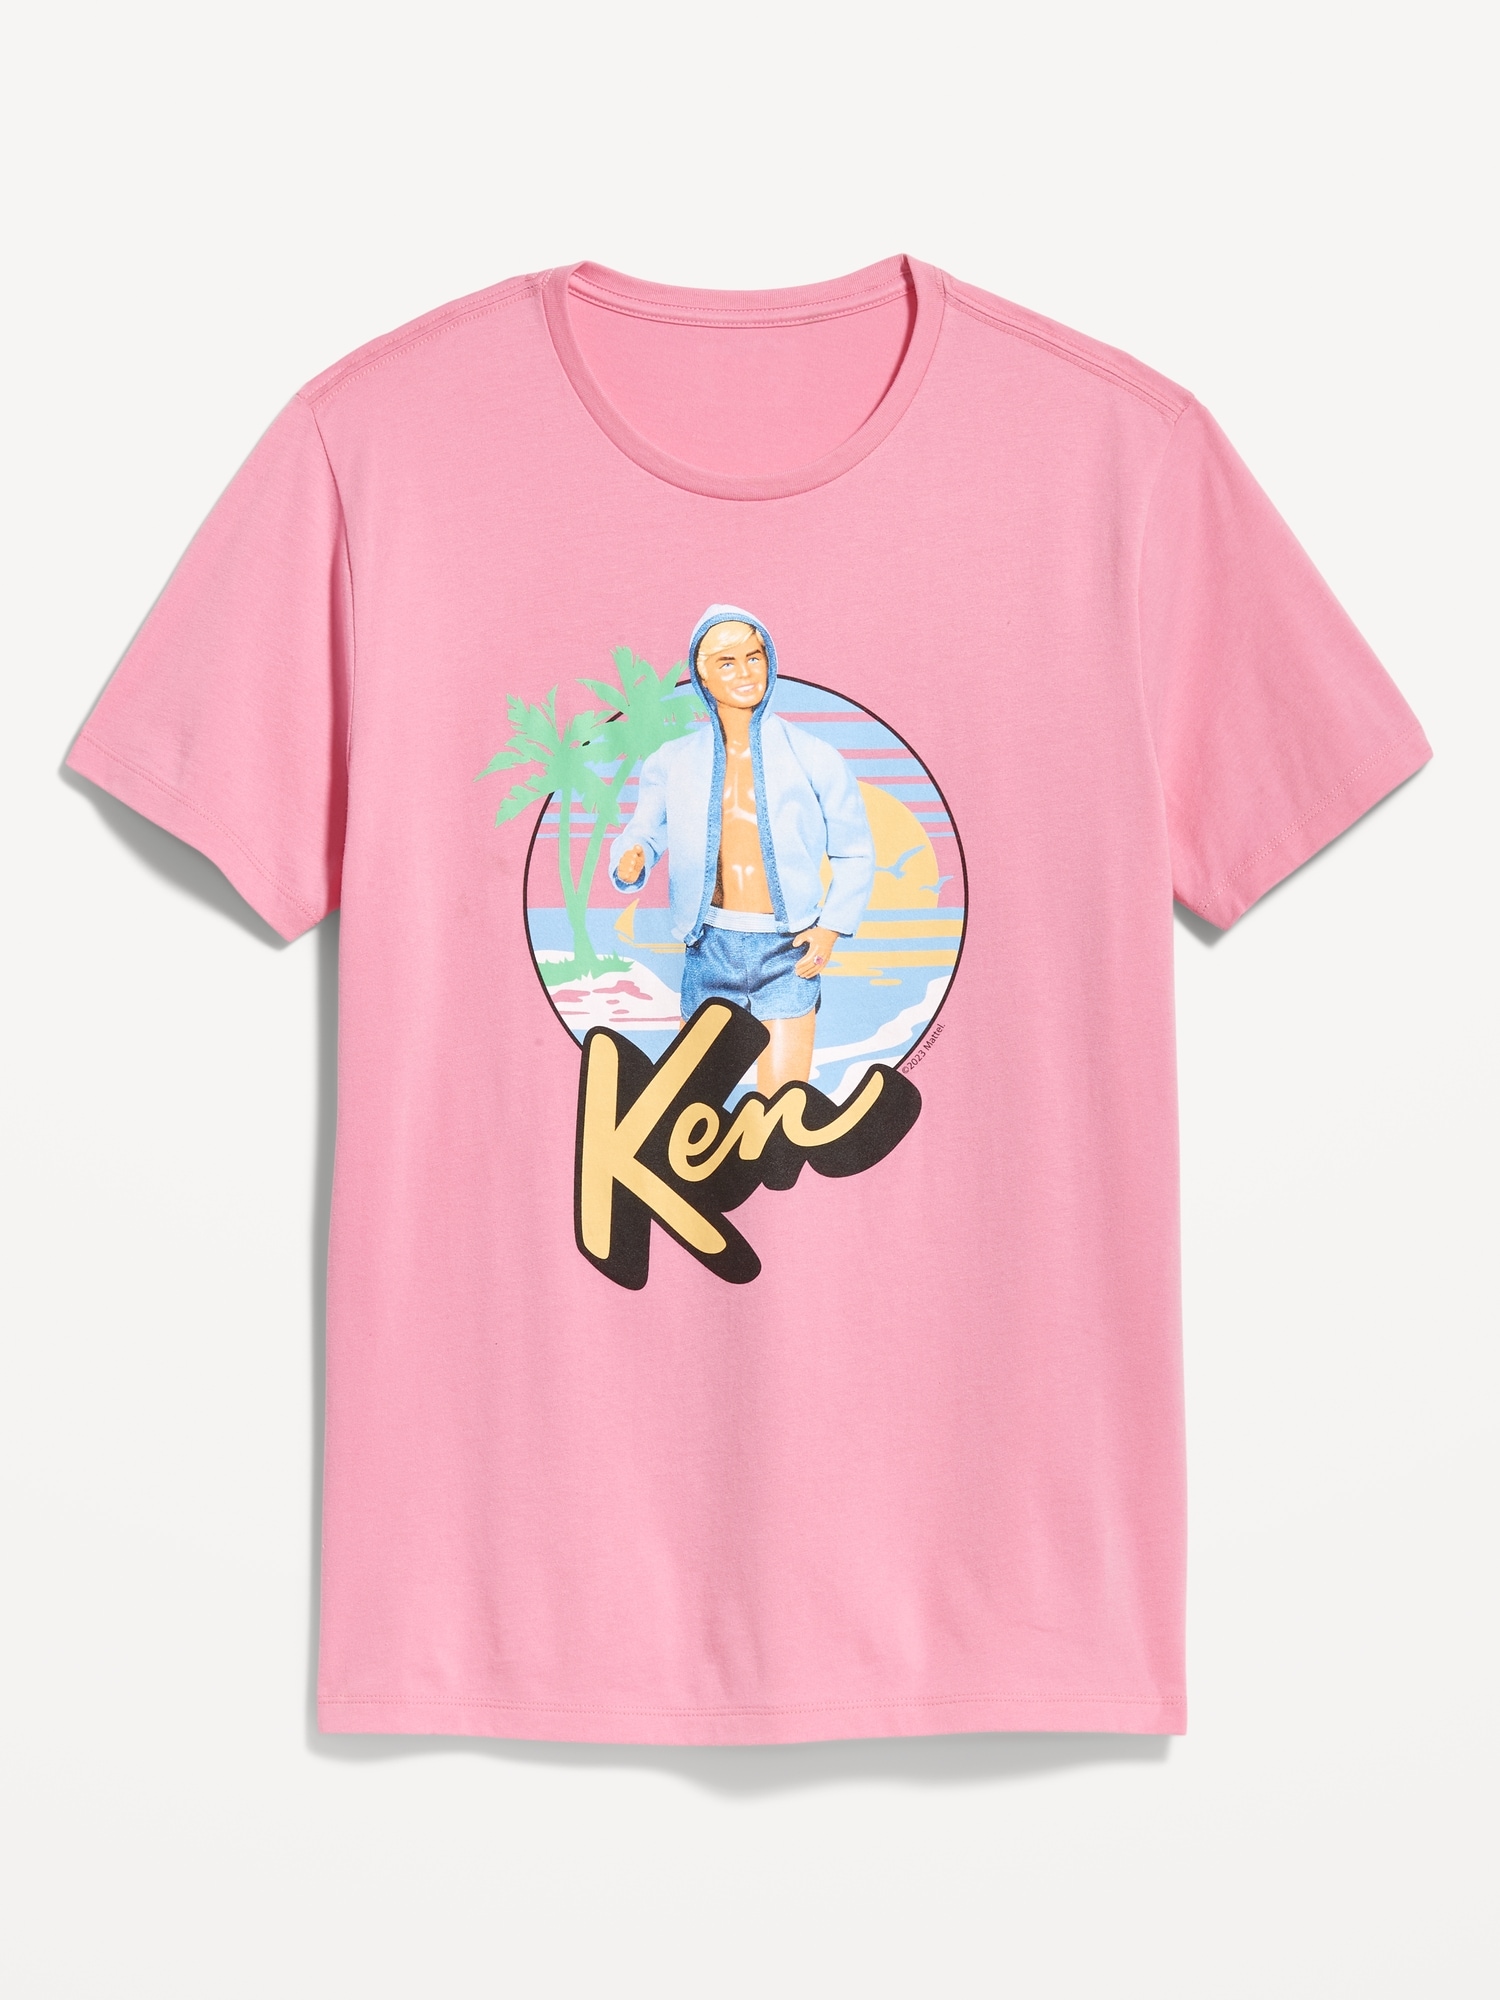 Old Navy Ken® Doll Gender-Neutral Graphic T-Shirt for Adults pink. 1